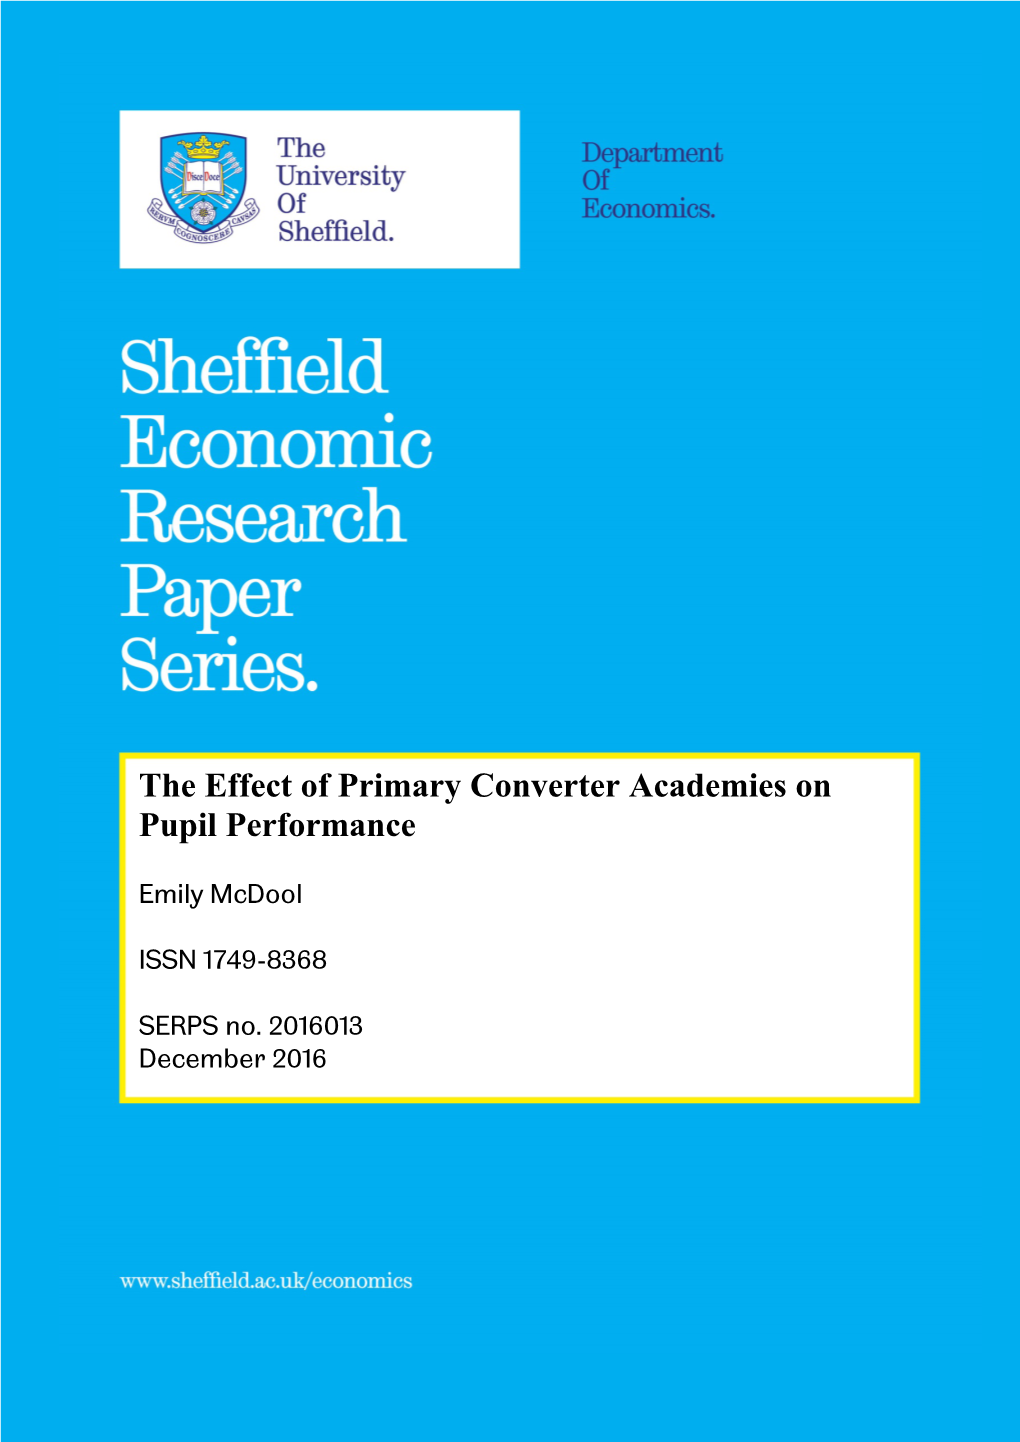 The Effect of Primary Converter Academies on Pupil Performance